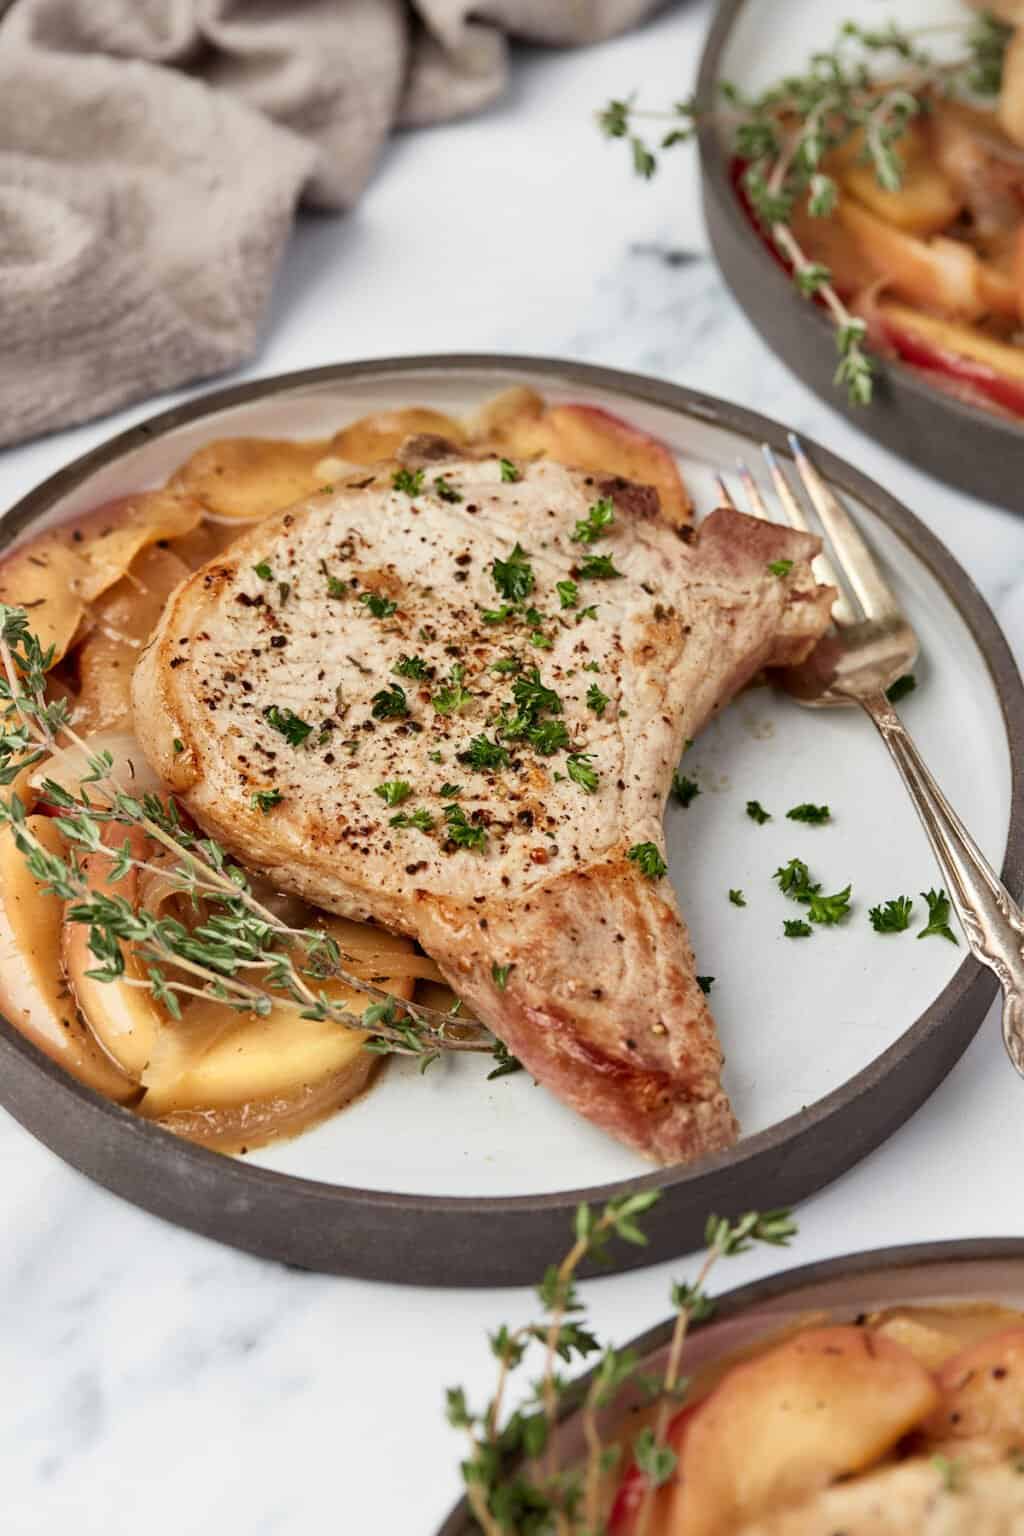 Juicy Pork Chops With Apples and Onions | Easy Dinner Recipes